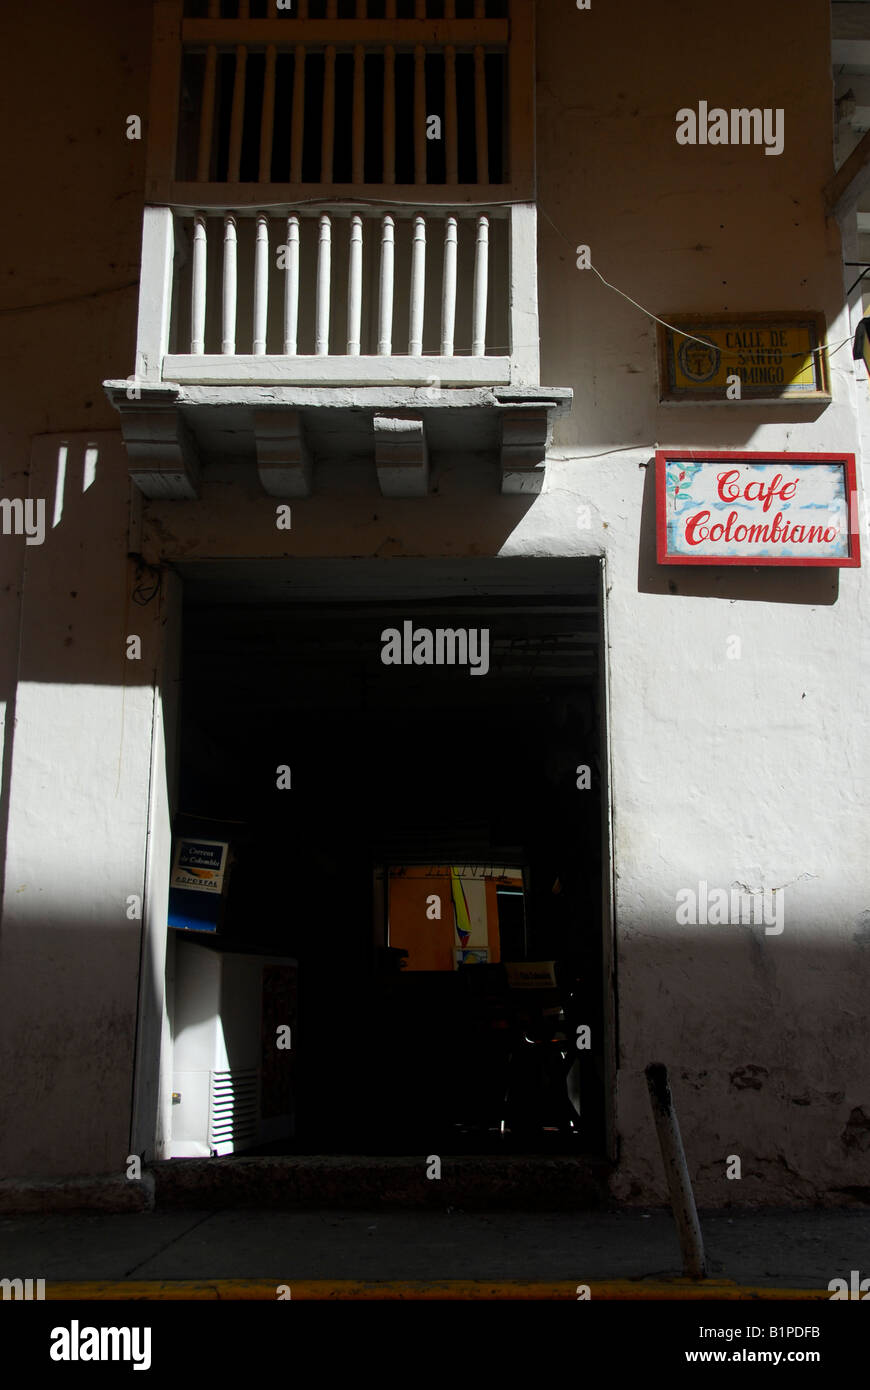 Cafe Colombiano sign on the wall of a shop on Plaza de Santo Domingo Cartagena de Indias, Colombia Stock Photo